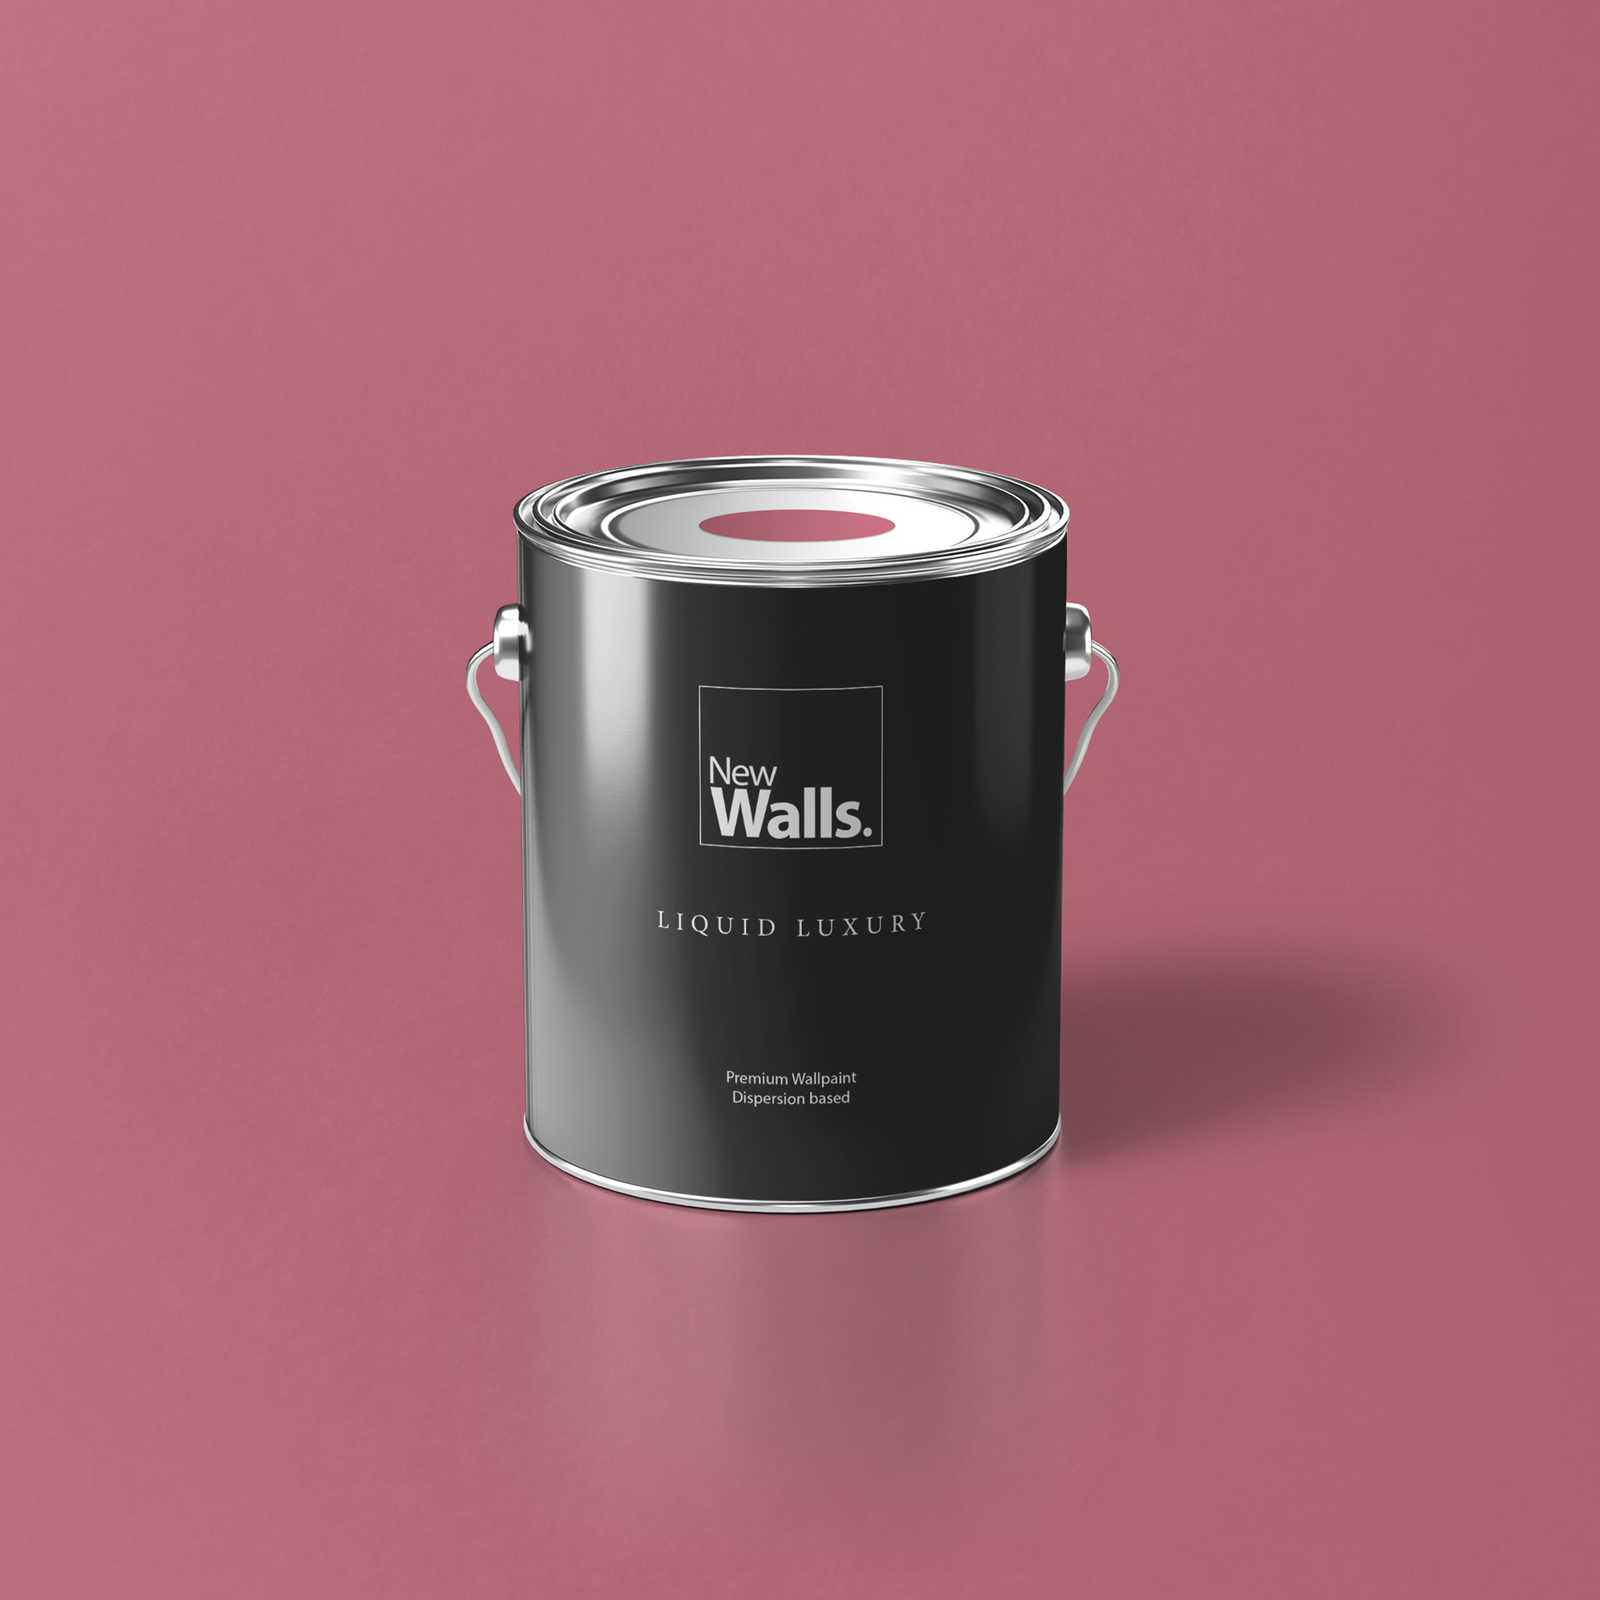 Premium Wall Paint Refreshing Dark Pink »Blooming Blossom« NW1018 – 2.5 litre
